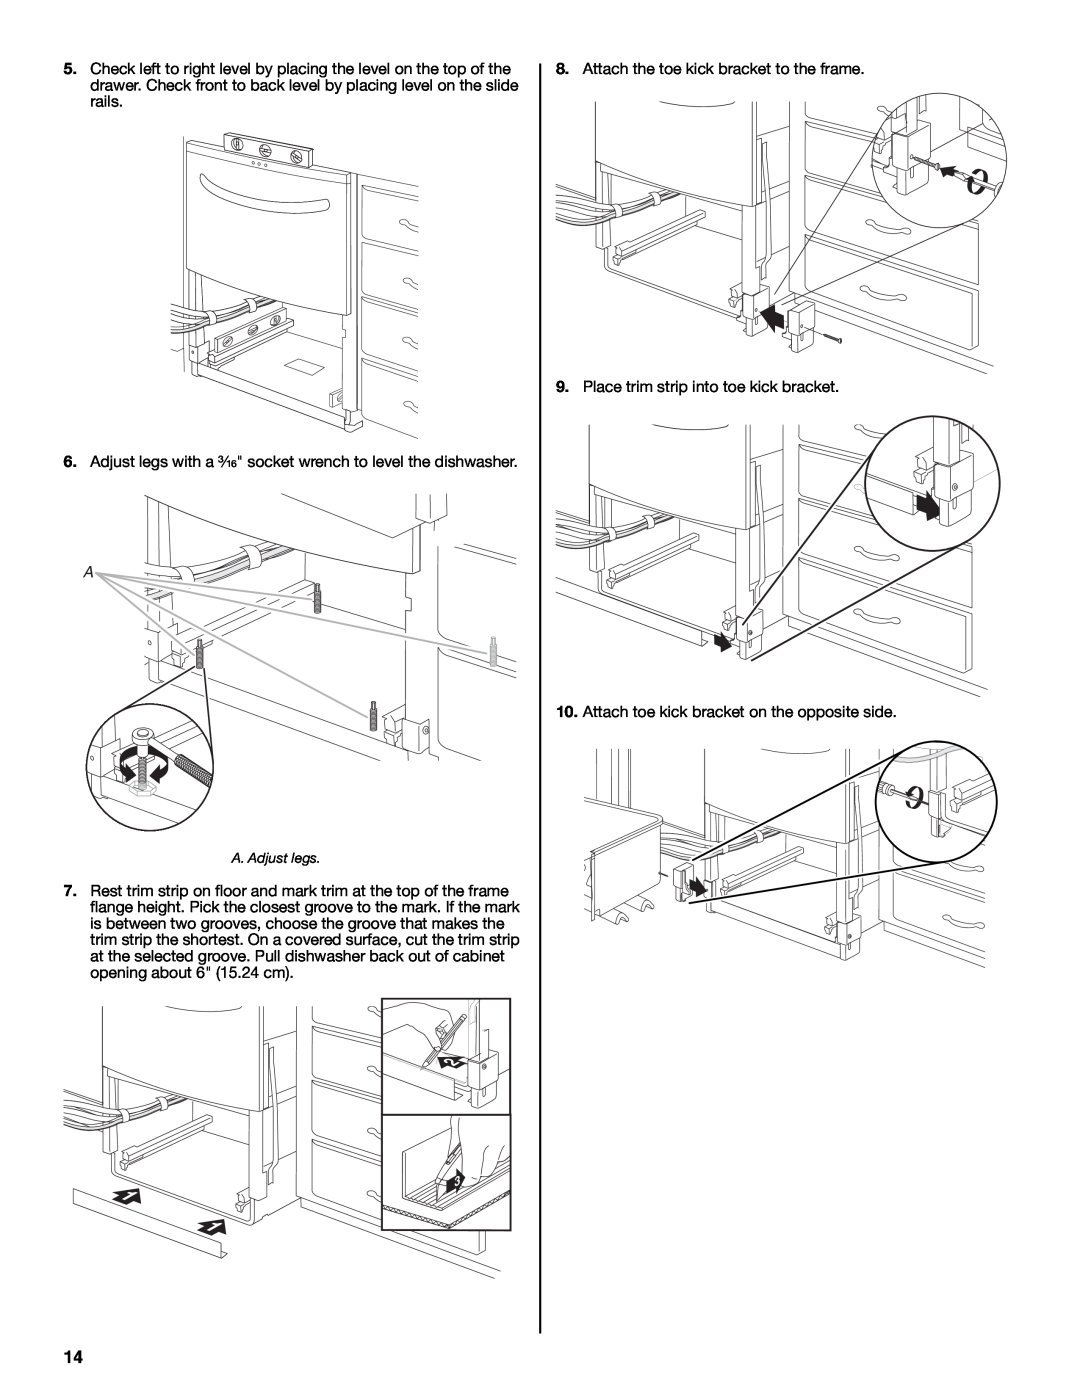 Maytag W10185071B installation instructions Attach the toe kick bracket to the frame 